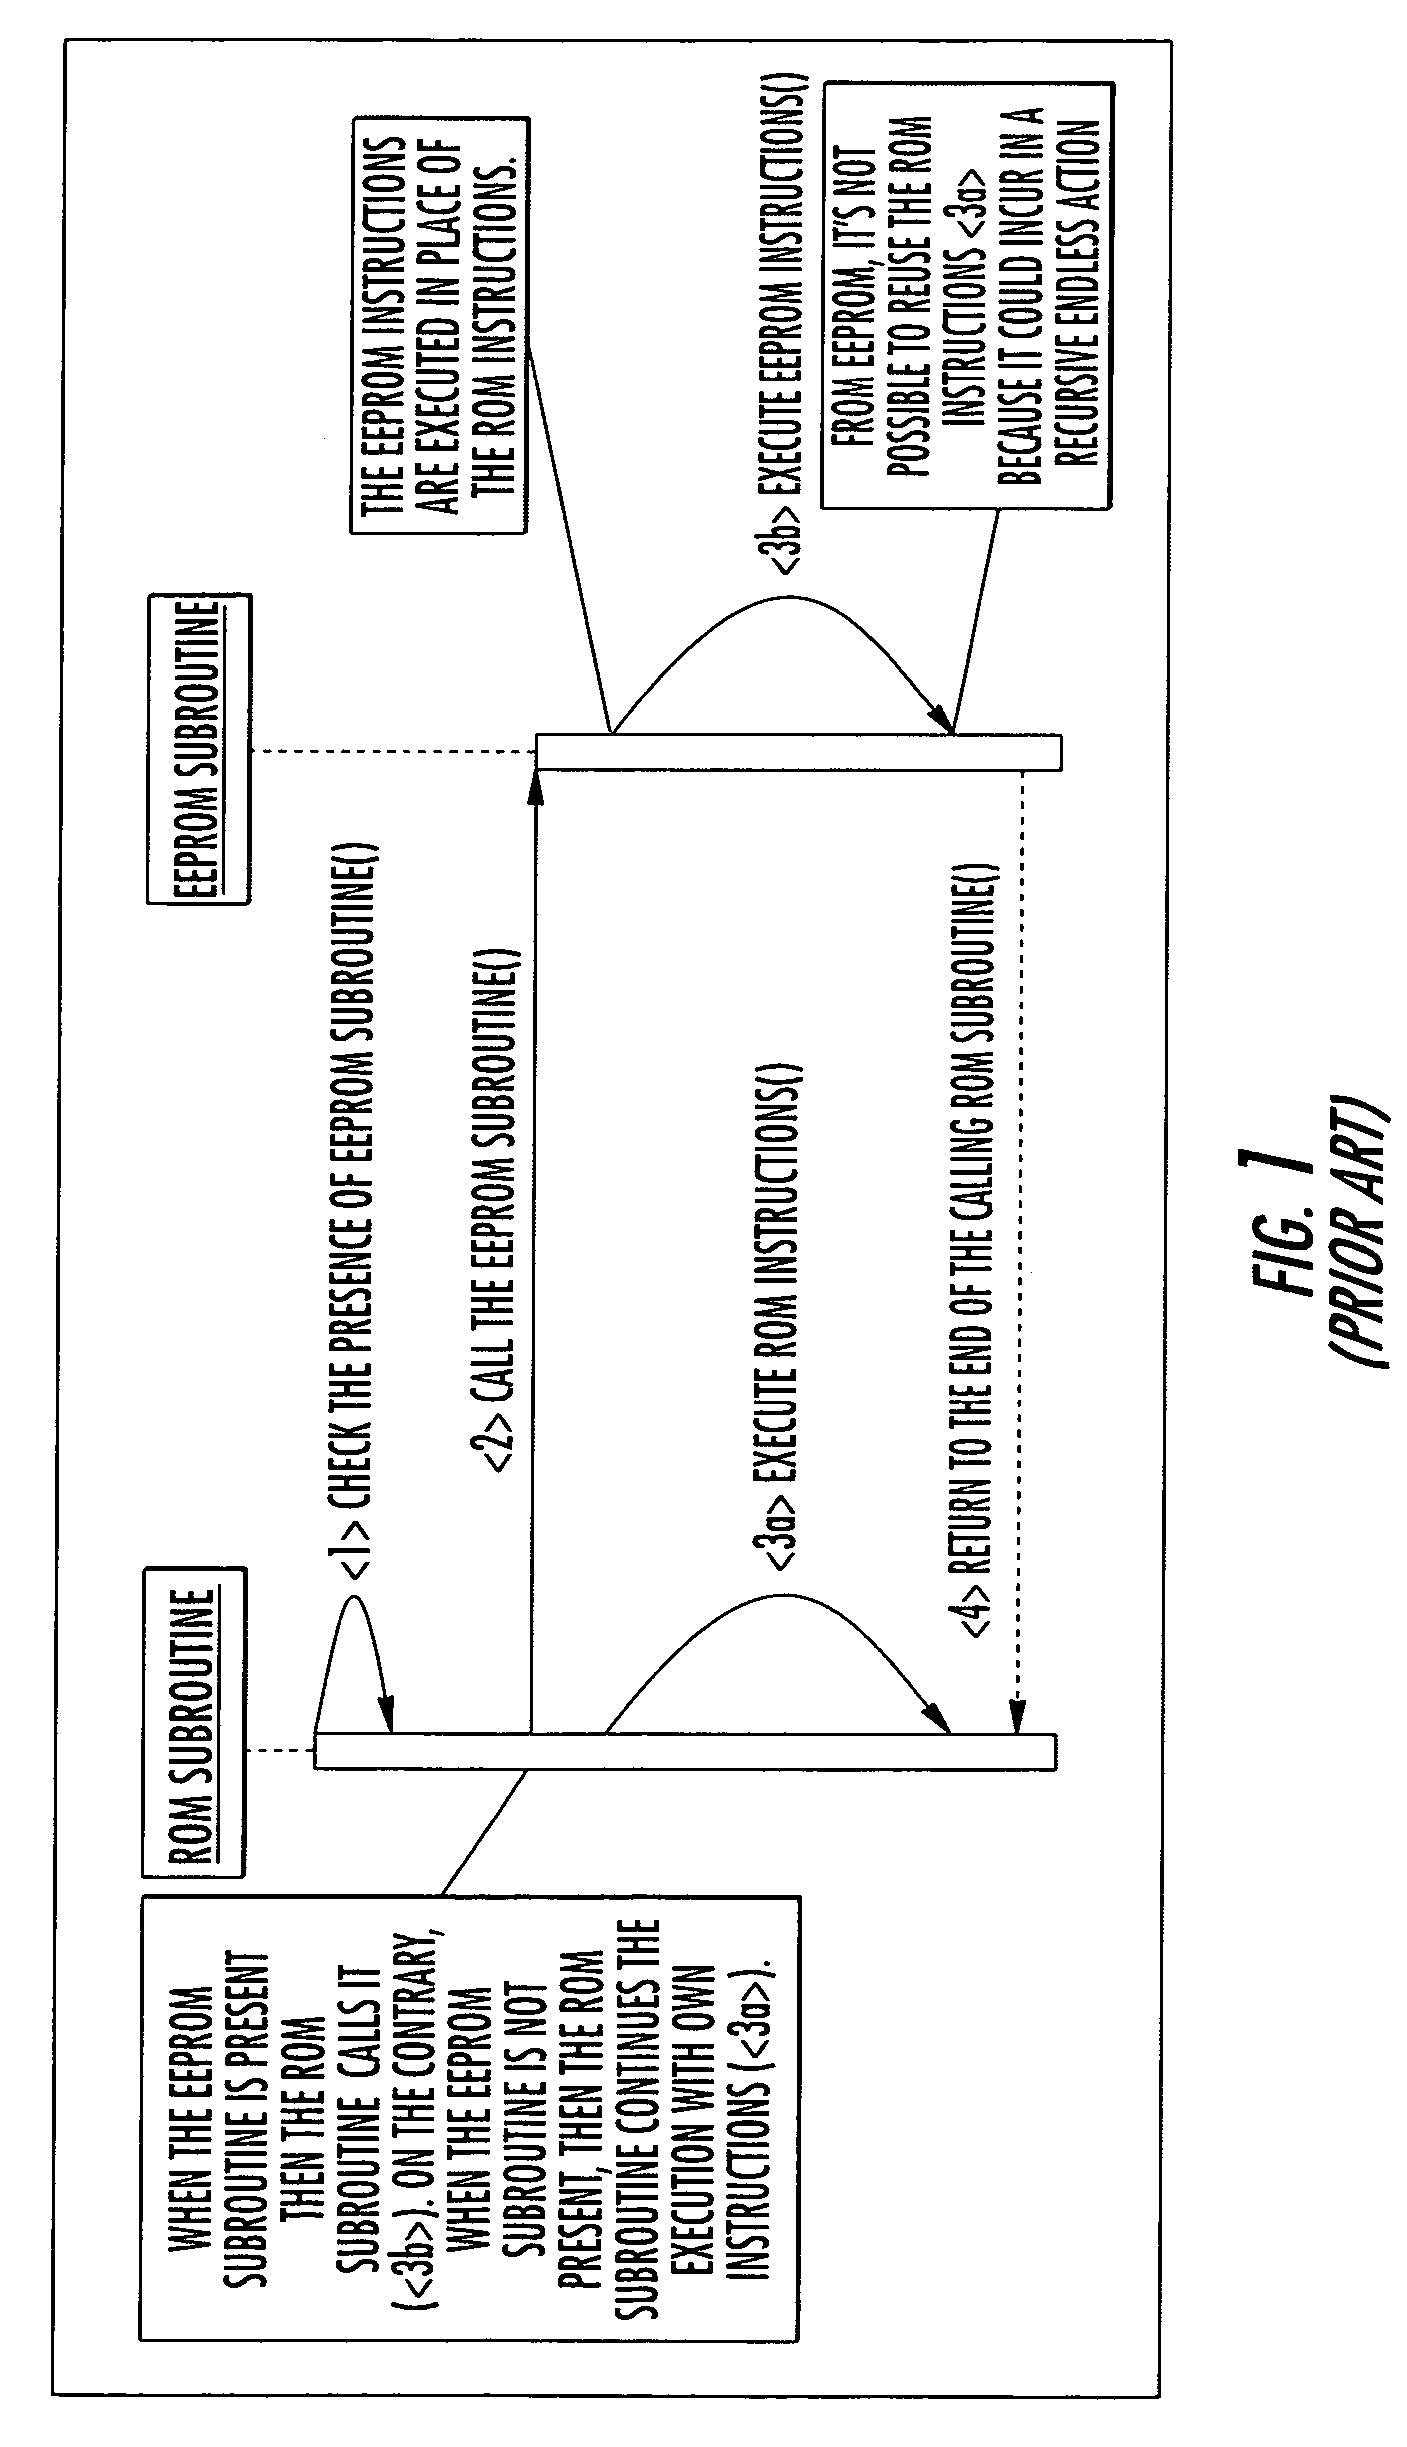 Method for patching ROM instructions in an electronic embedded system including at least a further memory portion